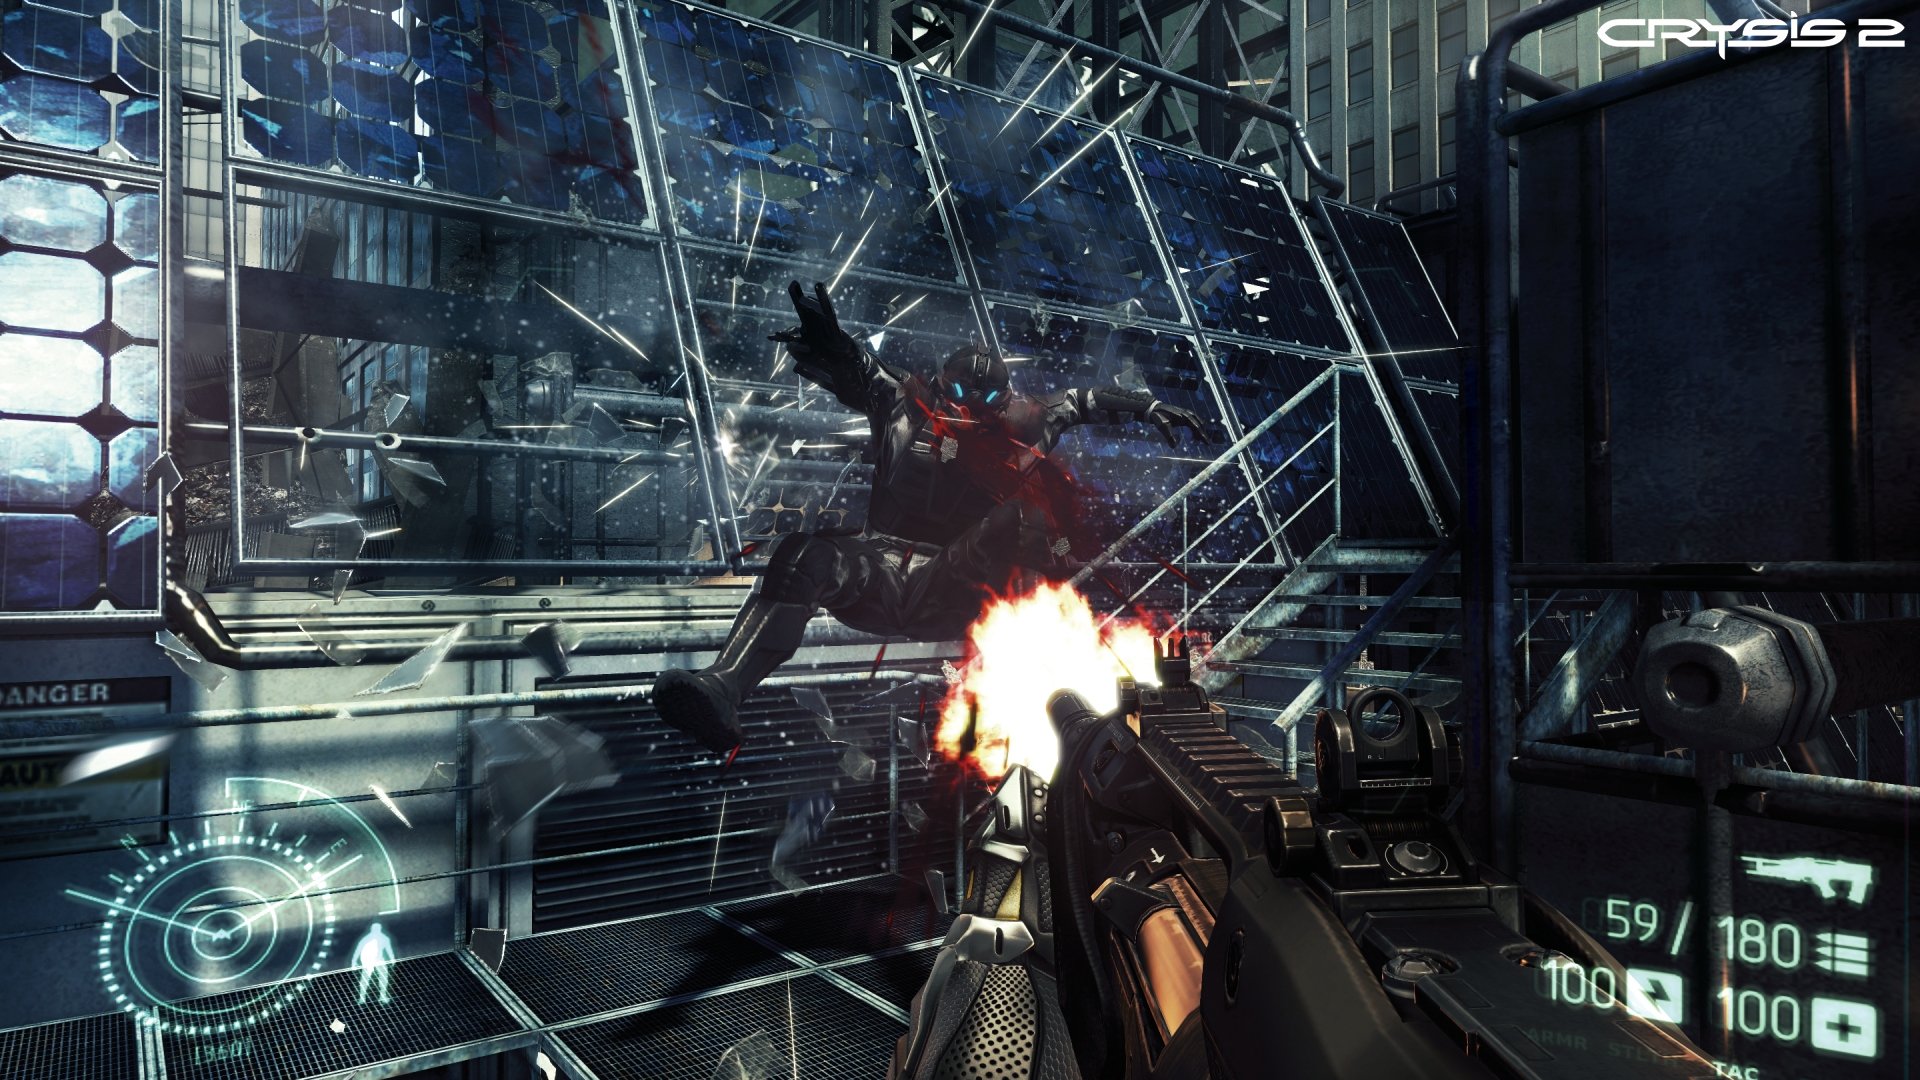 Media asset in full size related to 3dfxzone.it news item entitled as follows: Electronic Arts mostra i primi screenshots in-game di Crysis 2 | Image Name: news13160_2.jpg